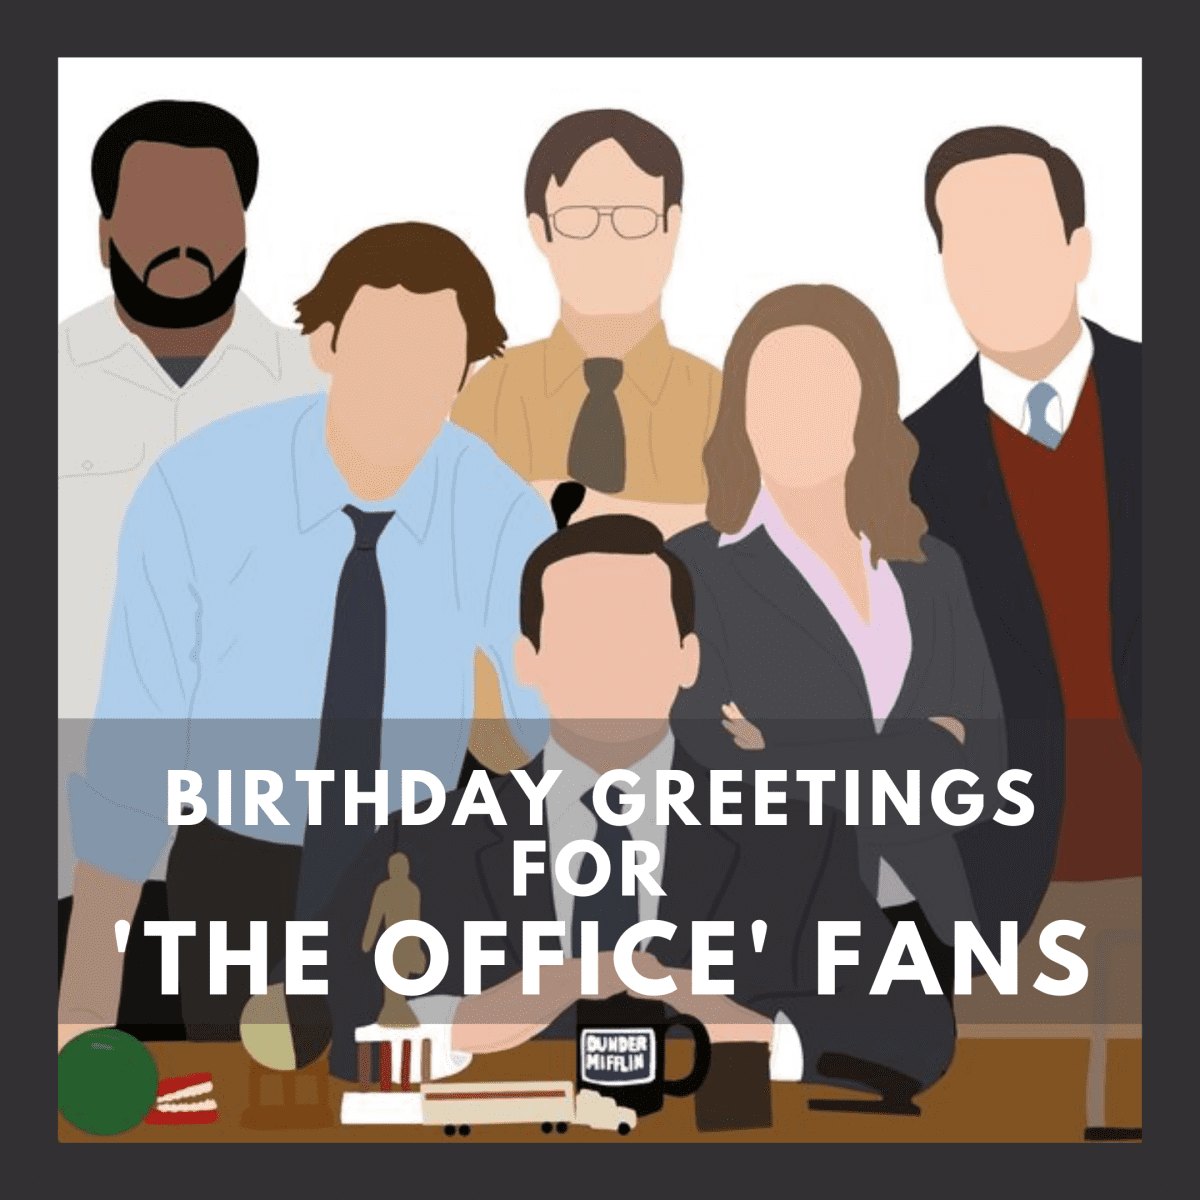 25+ Birthday Wishes for 'The Office' Fans - HubPages